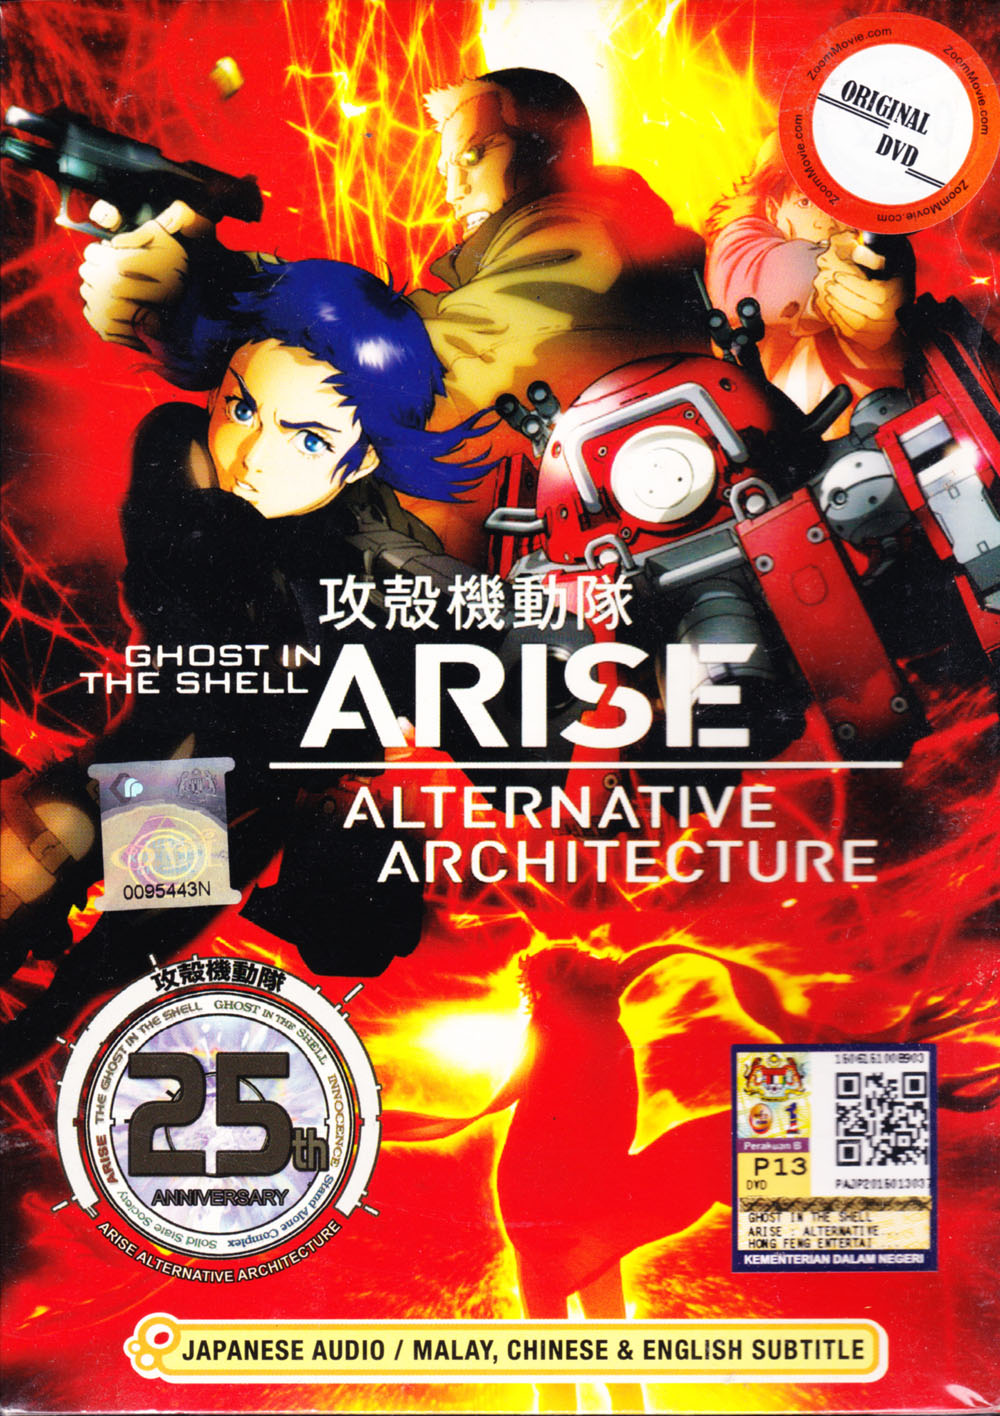 Ghost in the Shell: Arise - Alternative Architecture image 2